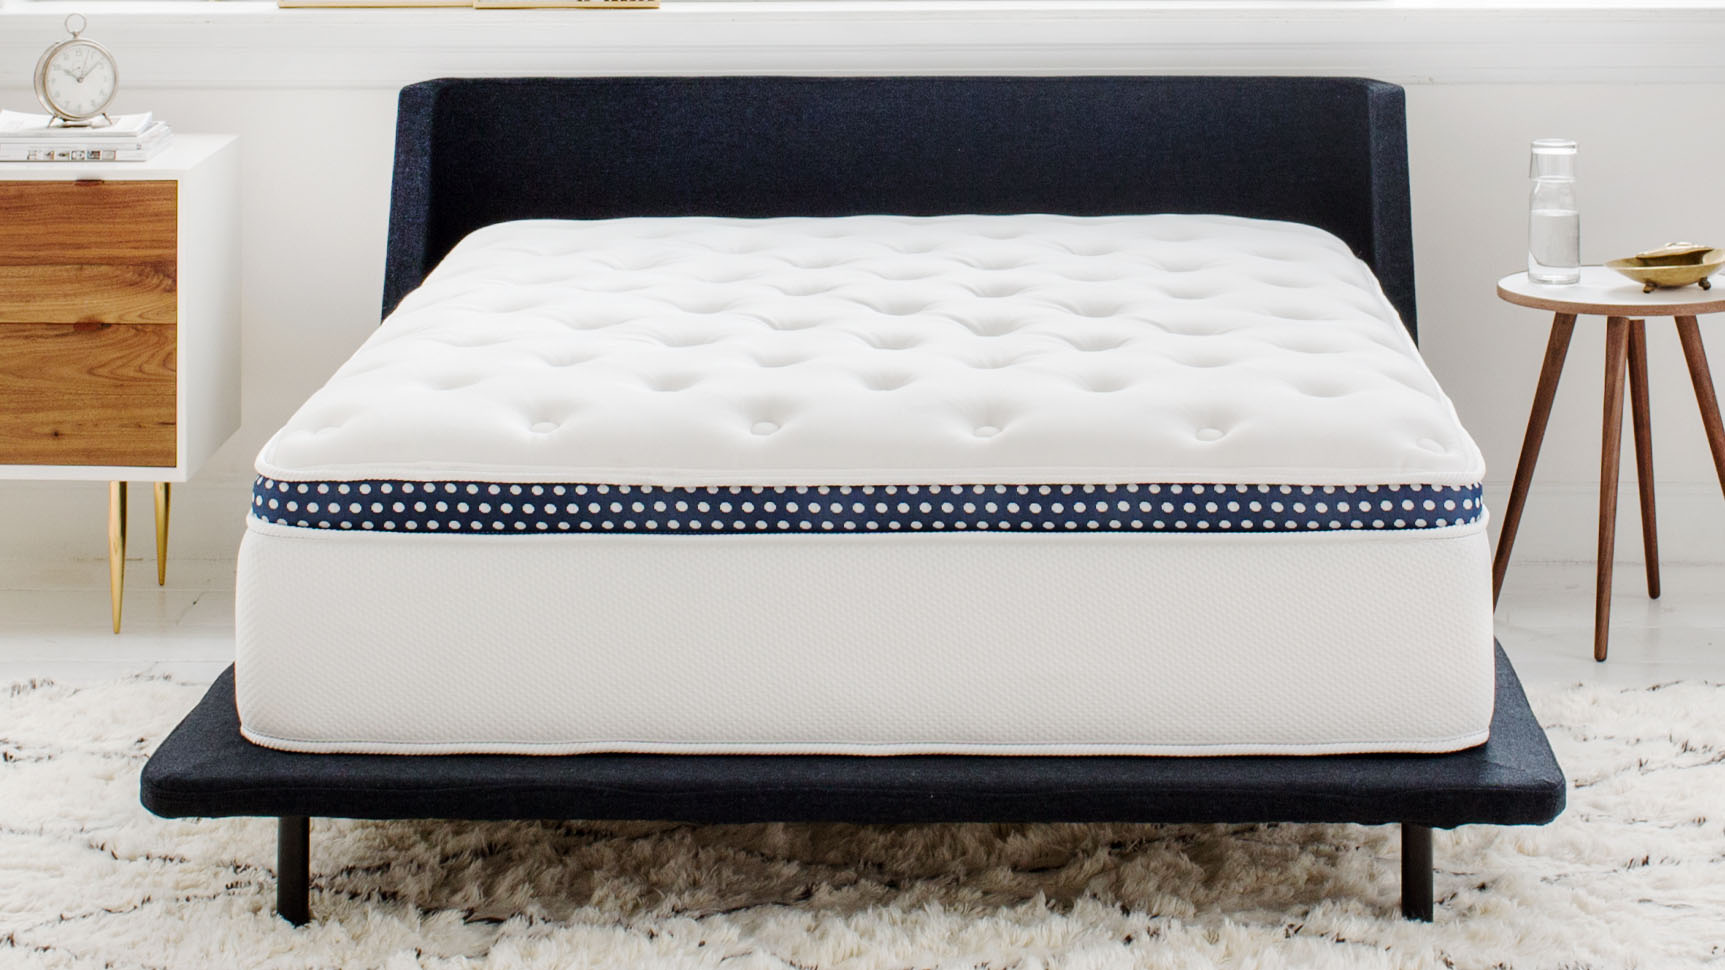 WinkBed mattress in a white bedroom